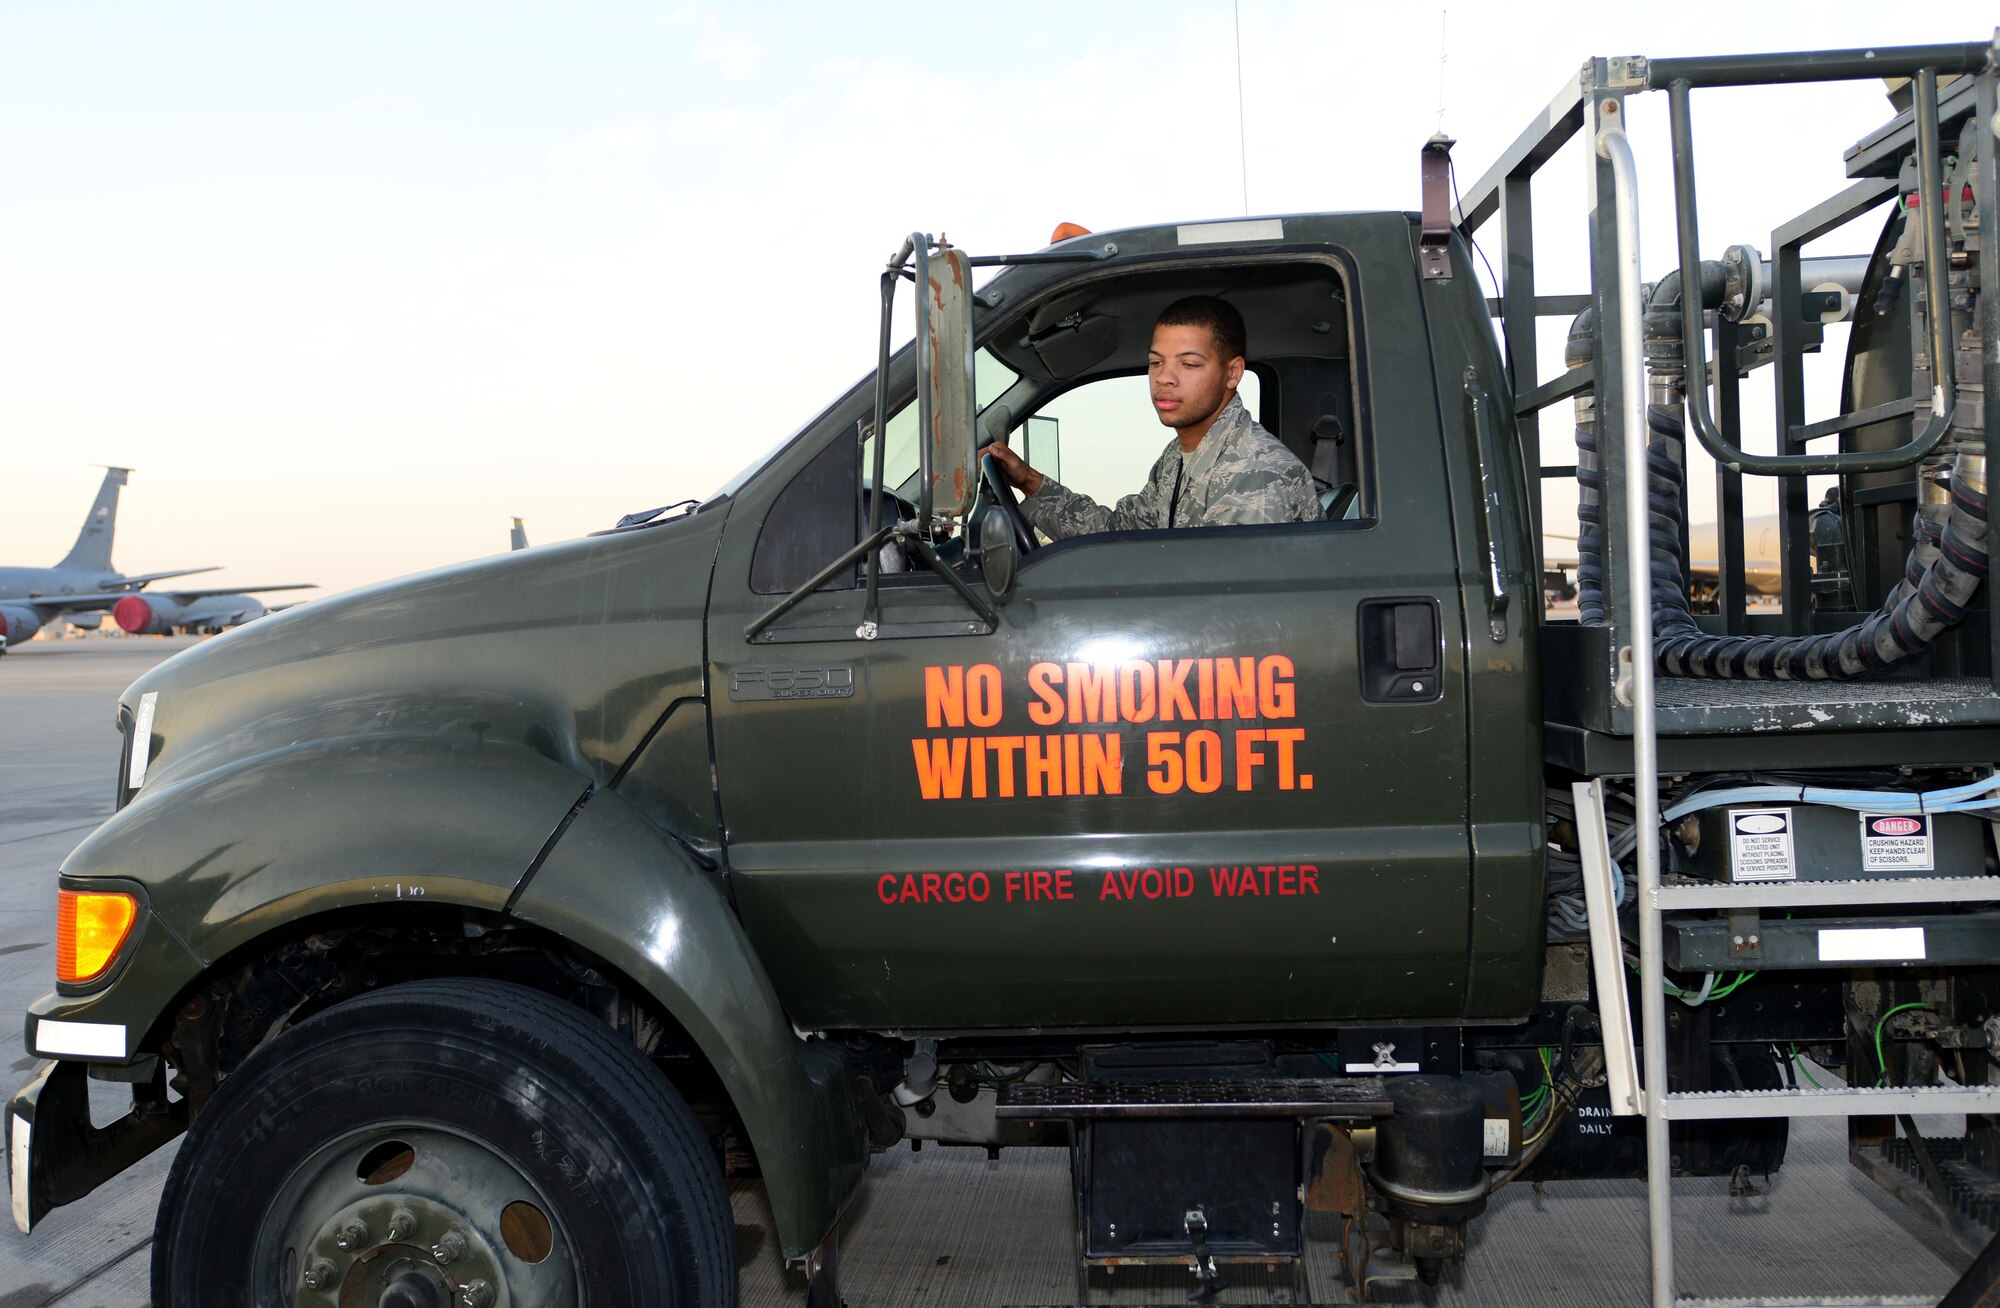 Airman 1st Class Jovonte Atkins, 379th Expeditionary Logistics Readiness Squadron fuels specialist, drives an R-12 refueler truck to refuel an aircraft at Al Udeid Air Base, Qatar, Feb. 5, 2015. Since 2001, the 379th ELRS fuels flight has delivered more than three billion gallons of aviation and ground fuel in support of operations Enduring Freedom and Iraqi Freedom. (U.S. Air Force photo by Master Sgt. Kerry Jackson)